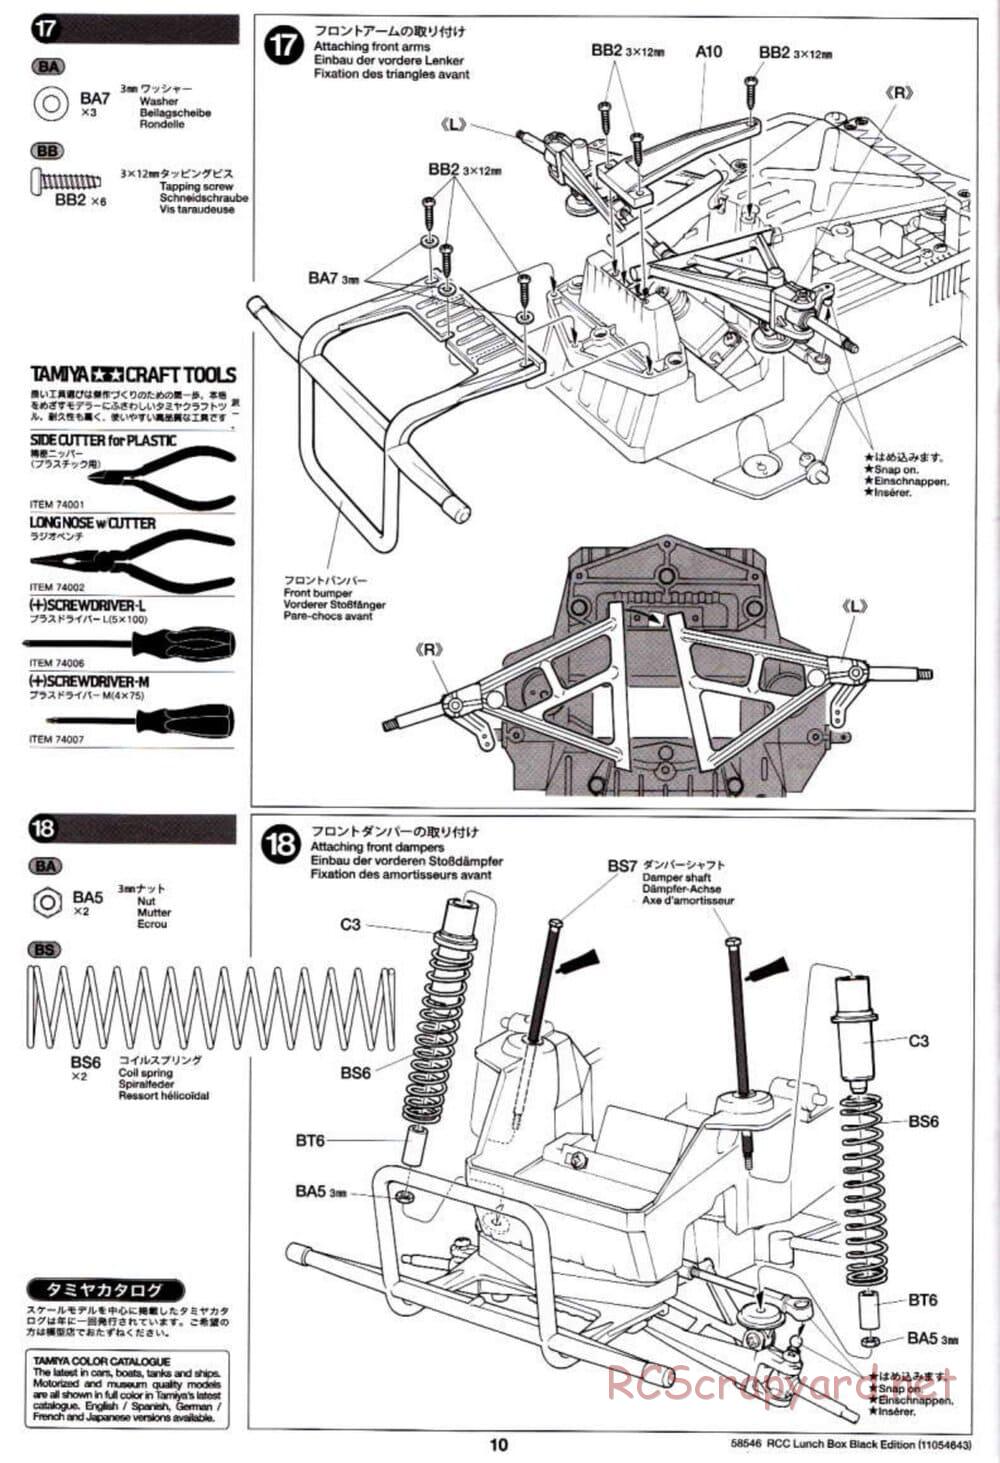 Tamiya - Lunch Box - Black Edition - CW-01 Chassis - Manual - Page 10